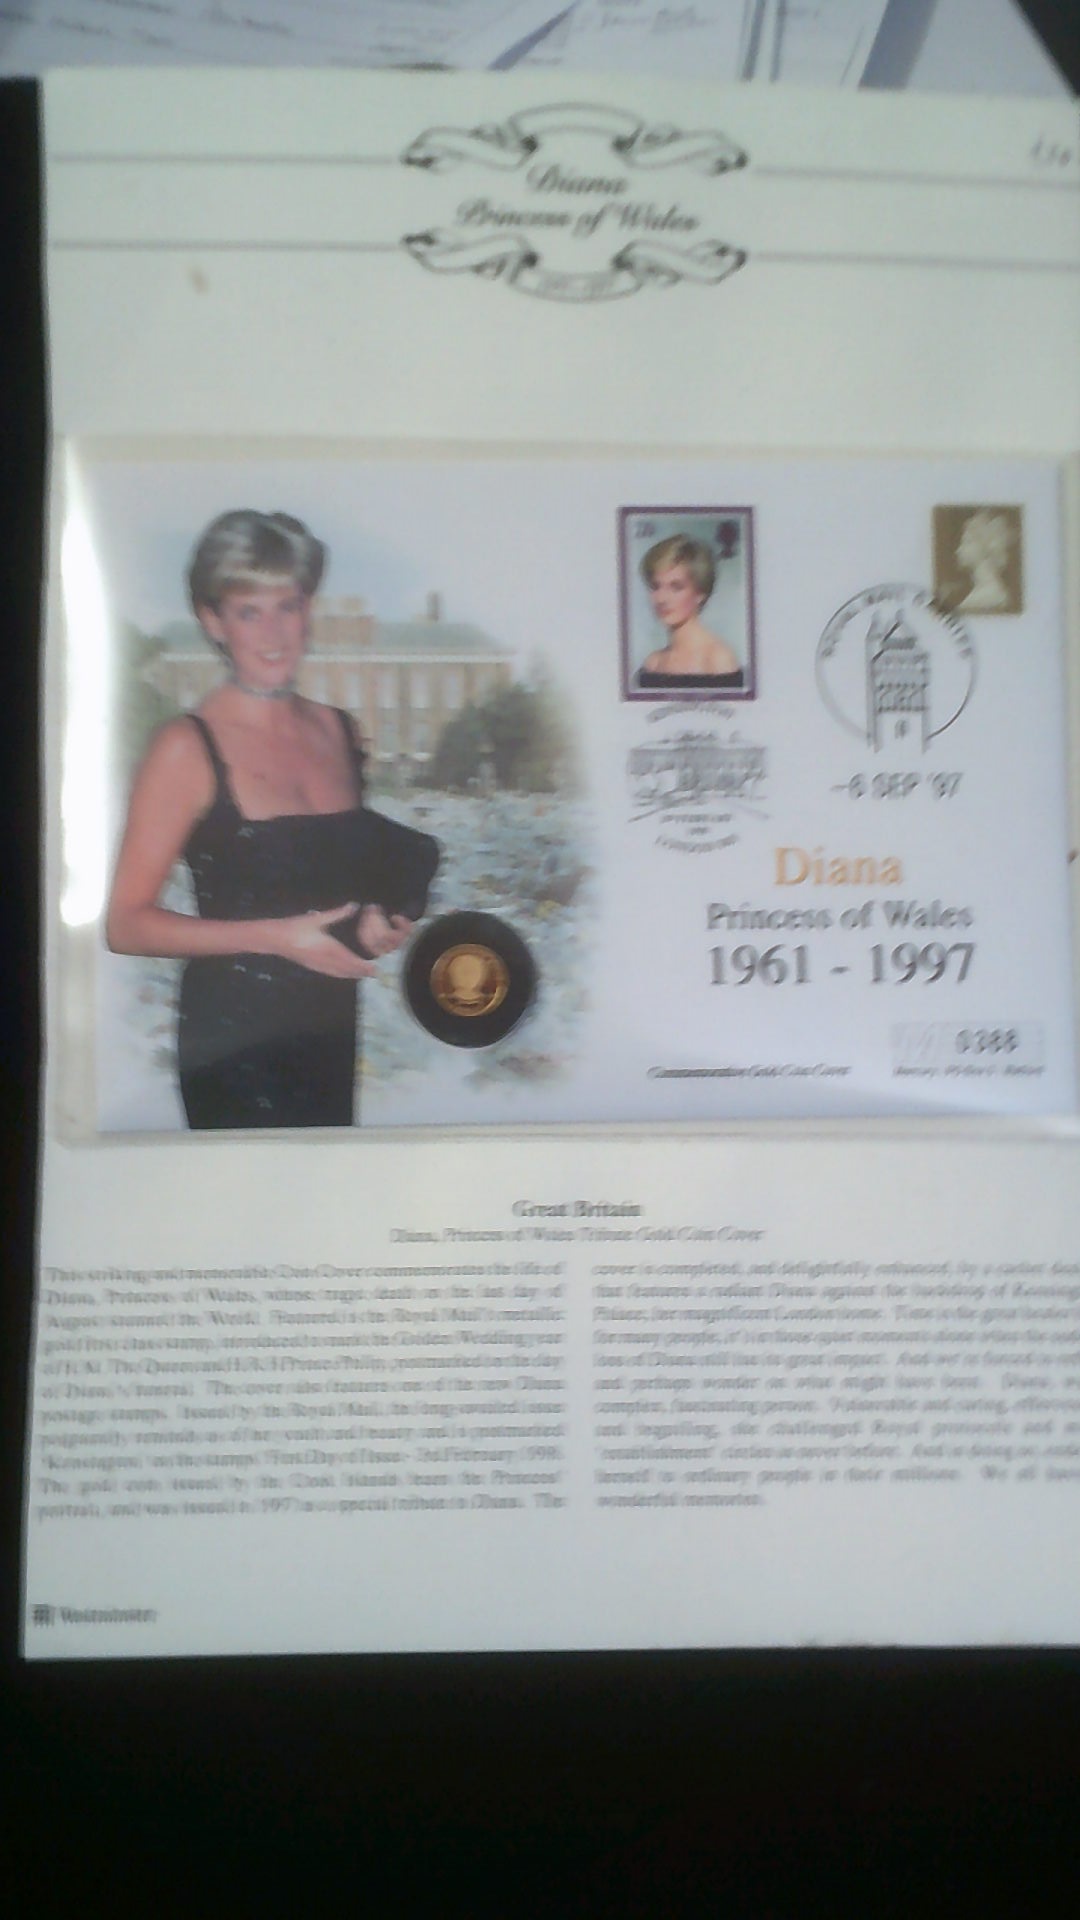 Gold 1988-Cook Islands, 5 dollars Princess of Wales Tribute Gold Coin Cover